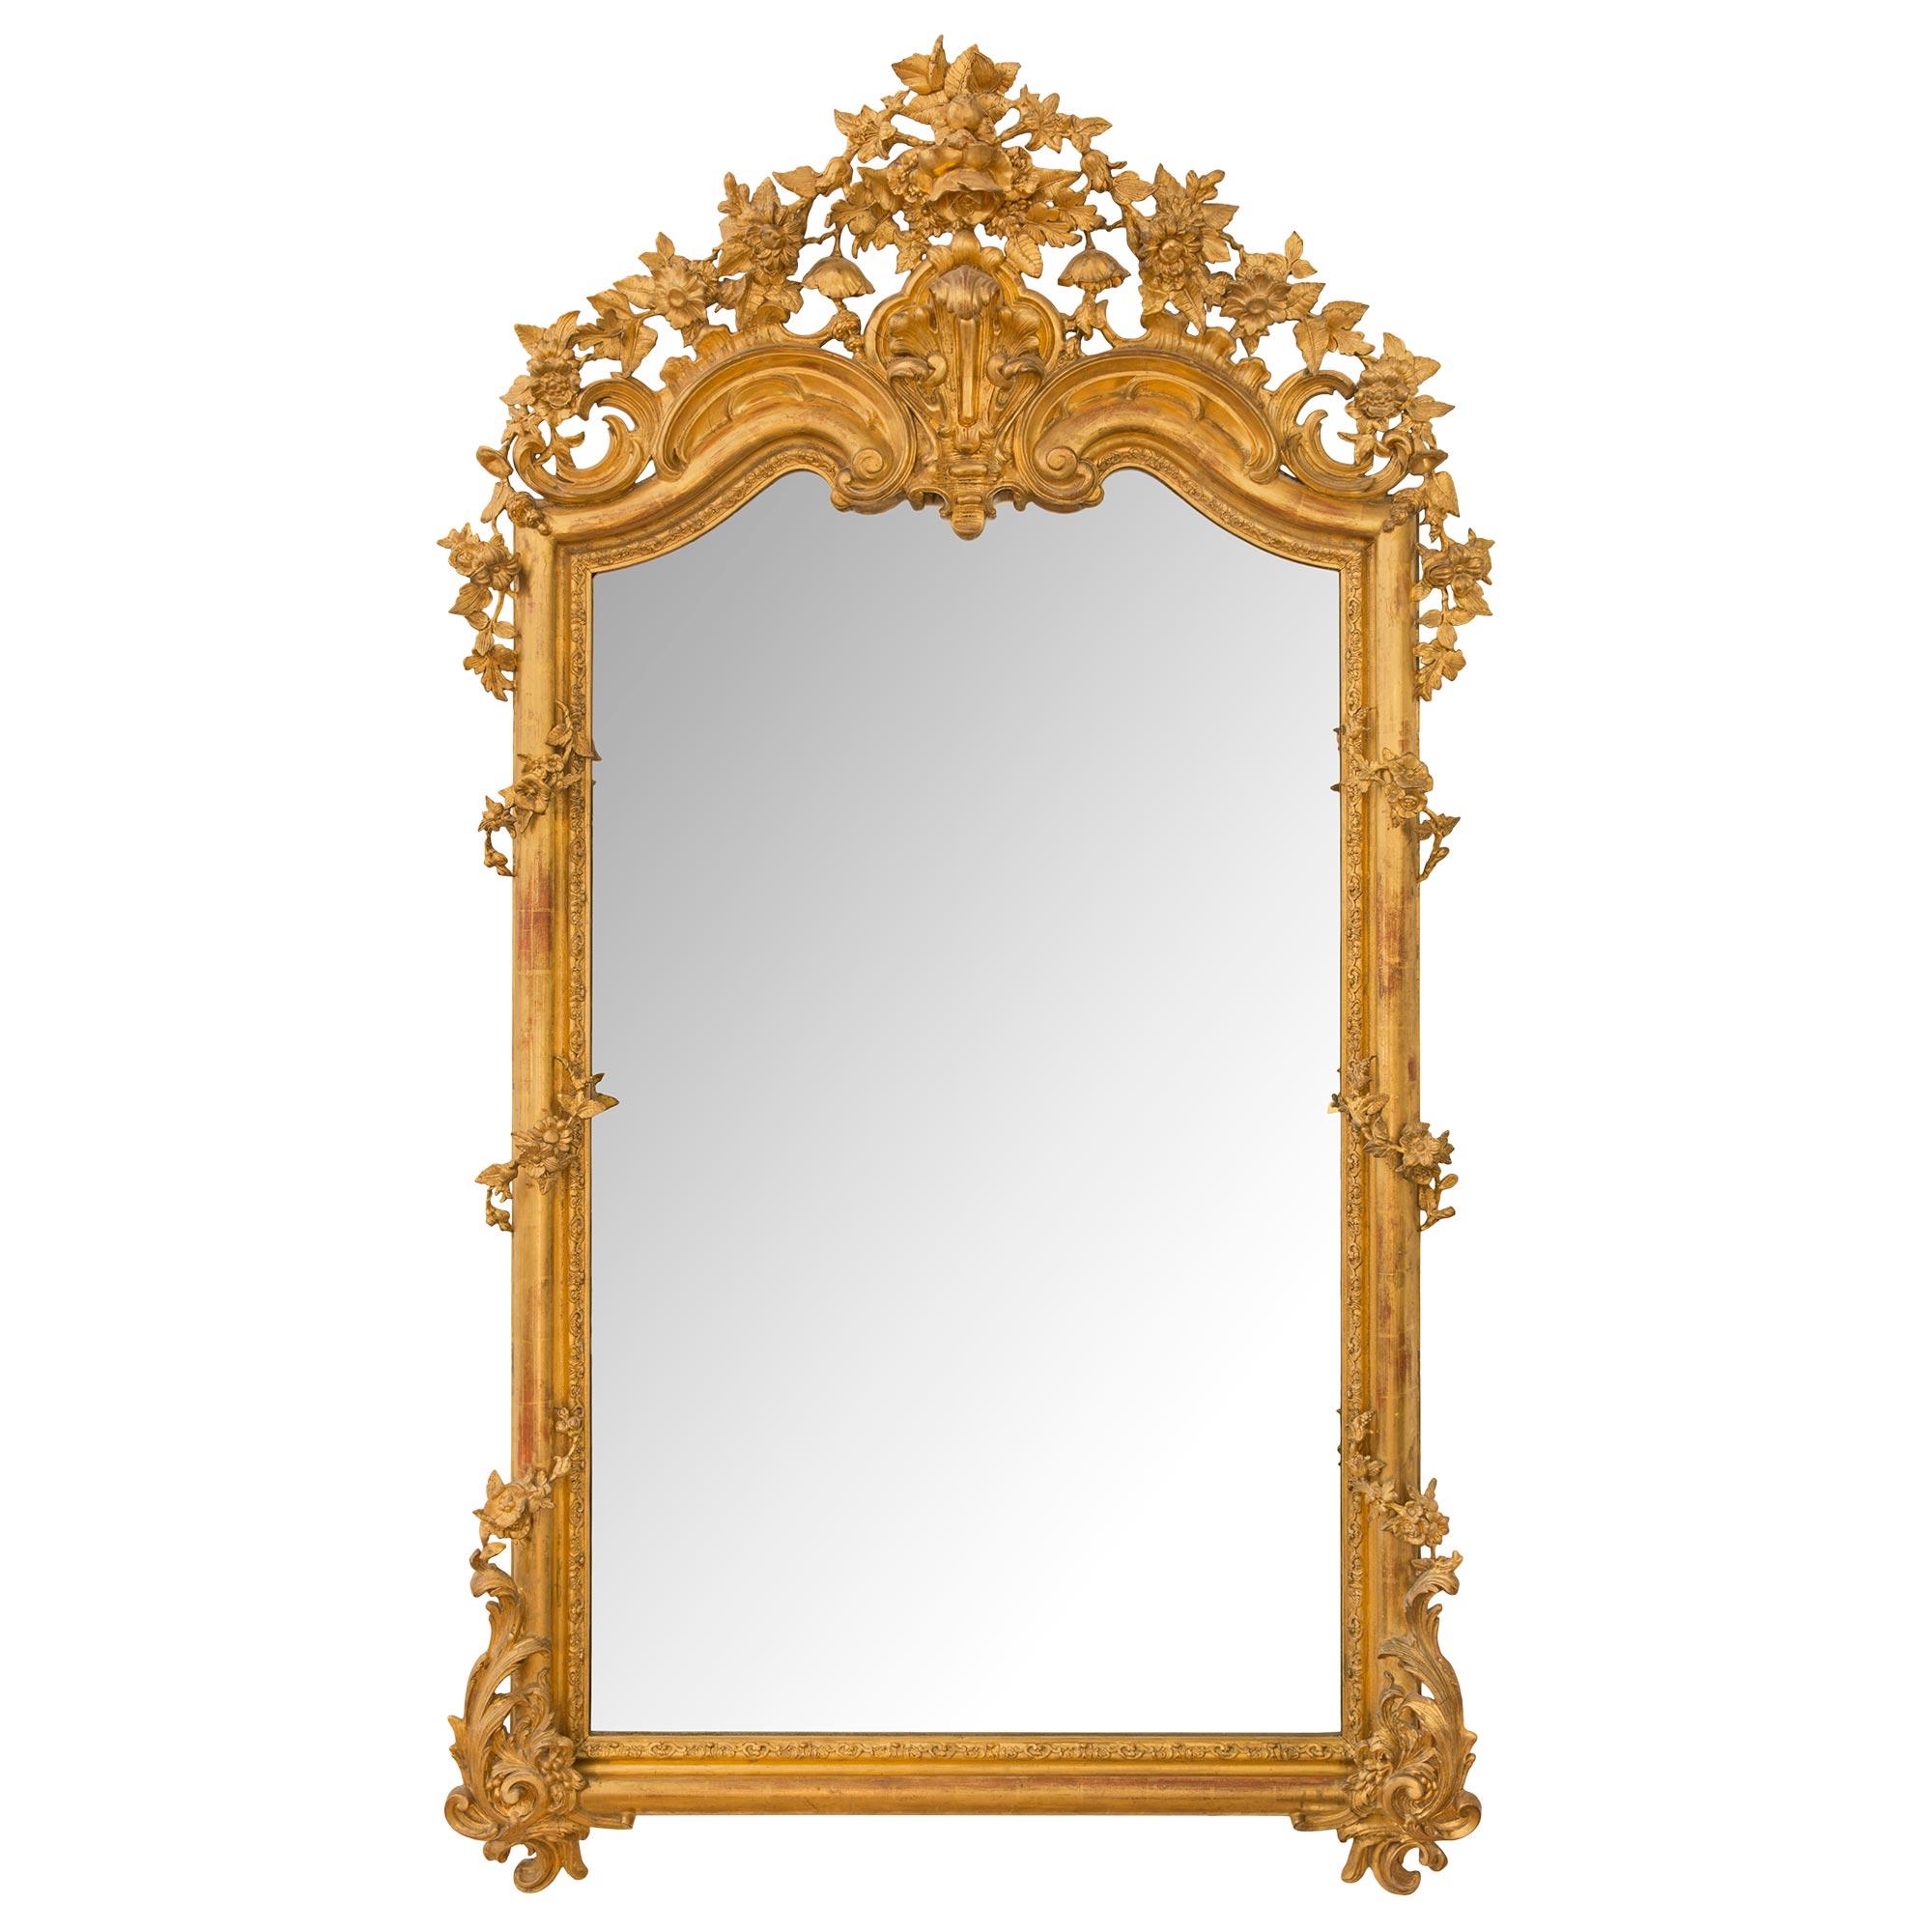 A stunning large scale Italian mid 19th century Louis XVI st. giltwood mirror. The mirror retains its original mirror plate set within a beautiful finely carved mottled foliate band with a delicate and most decorative lattice background. At each